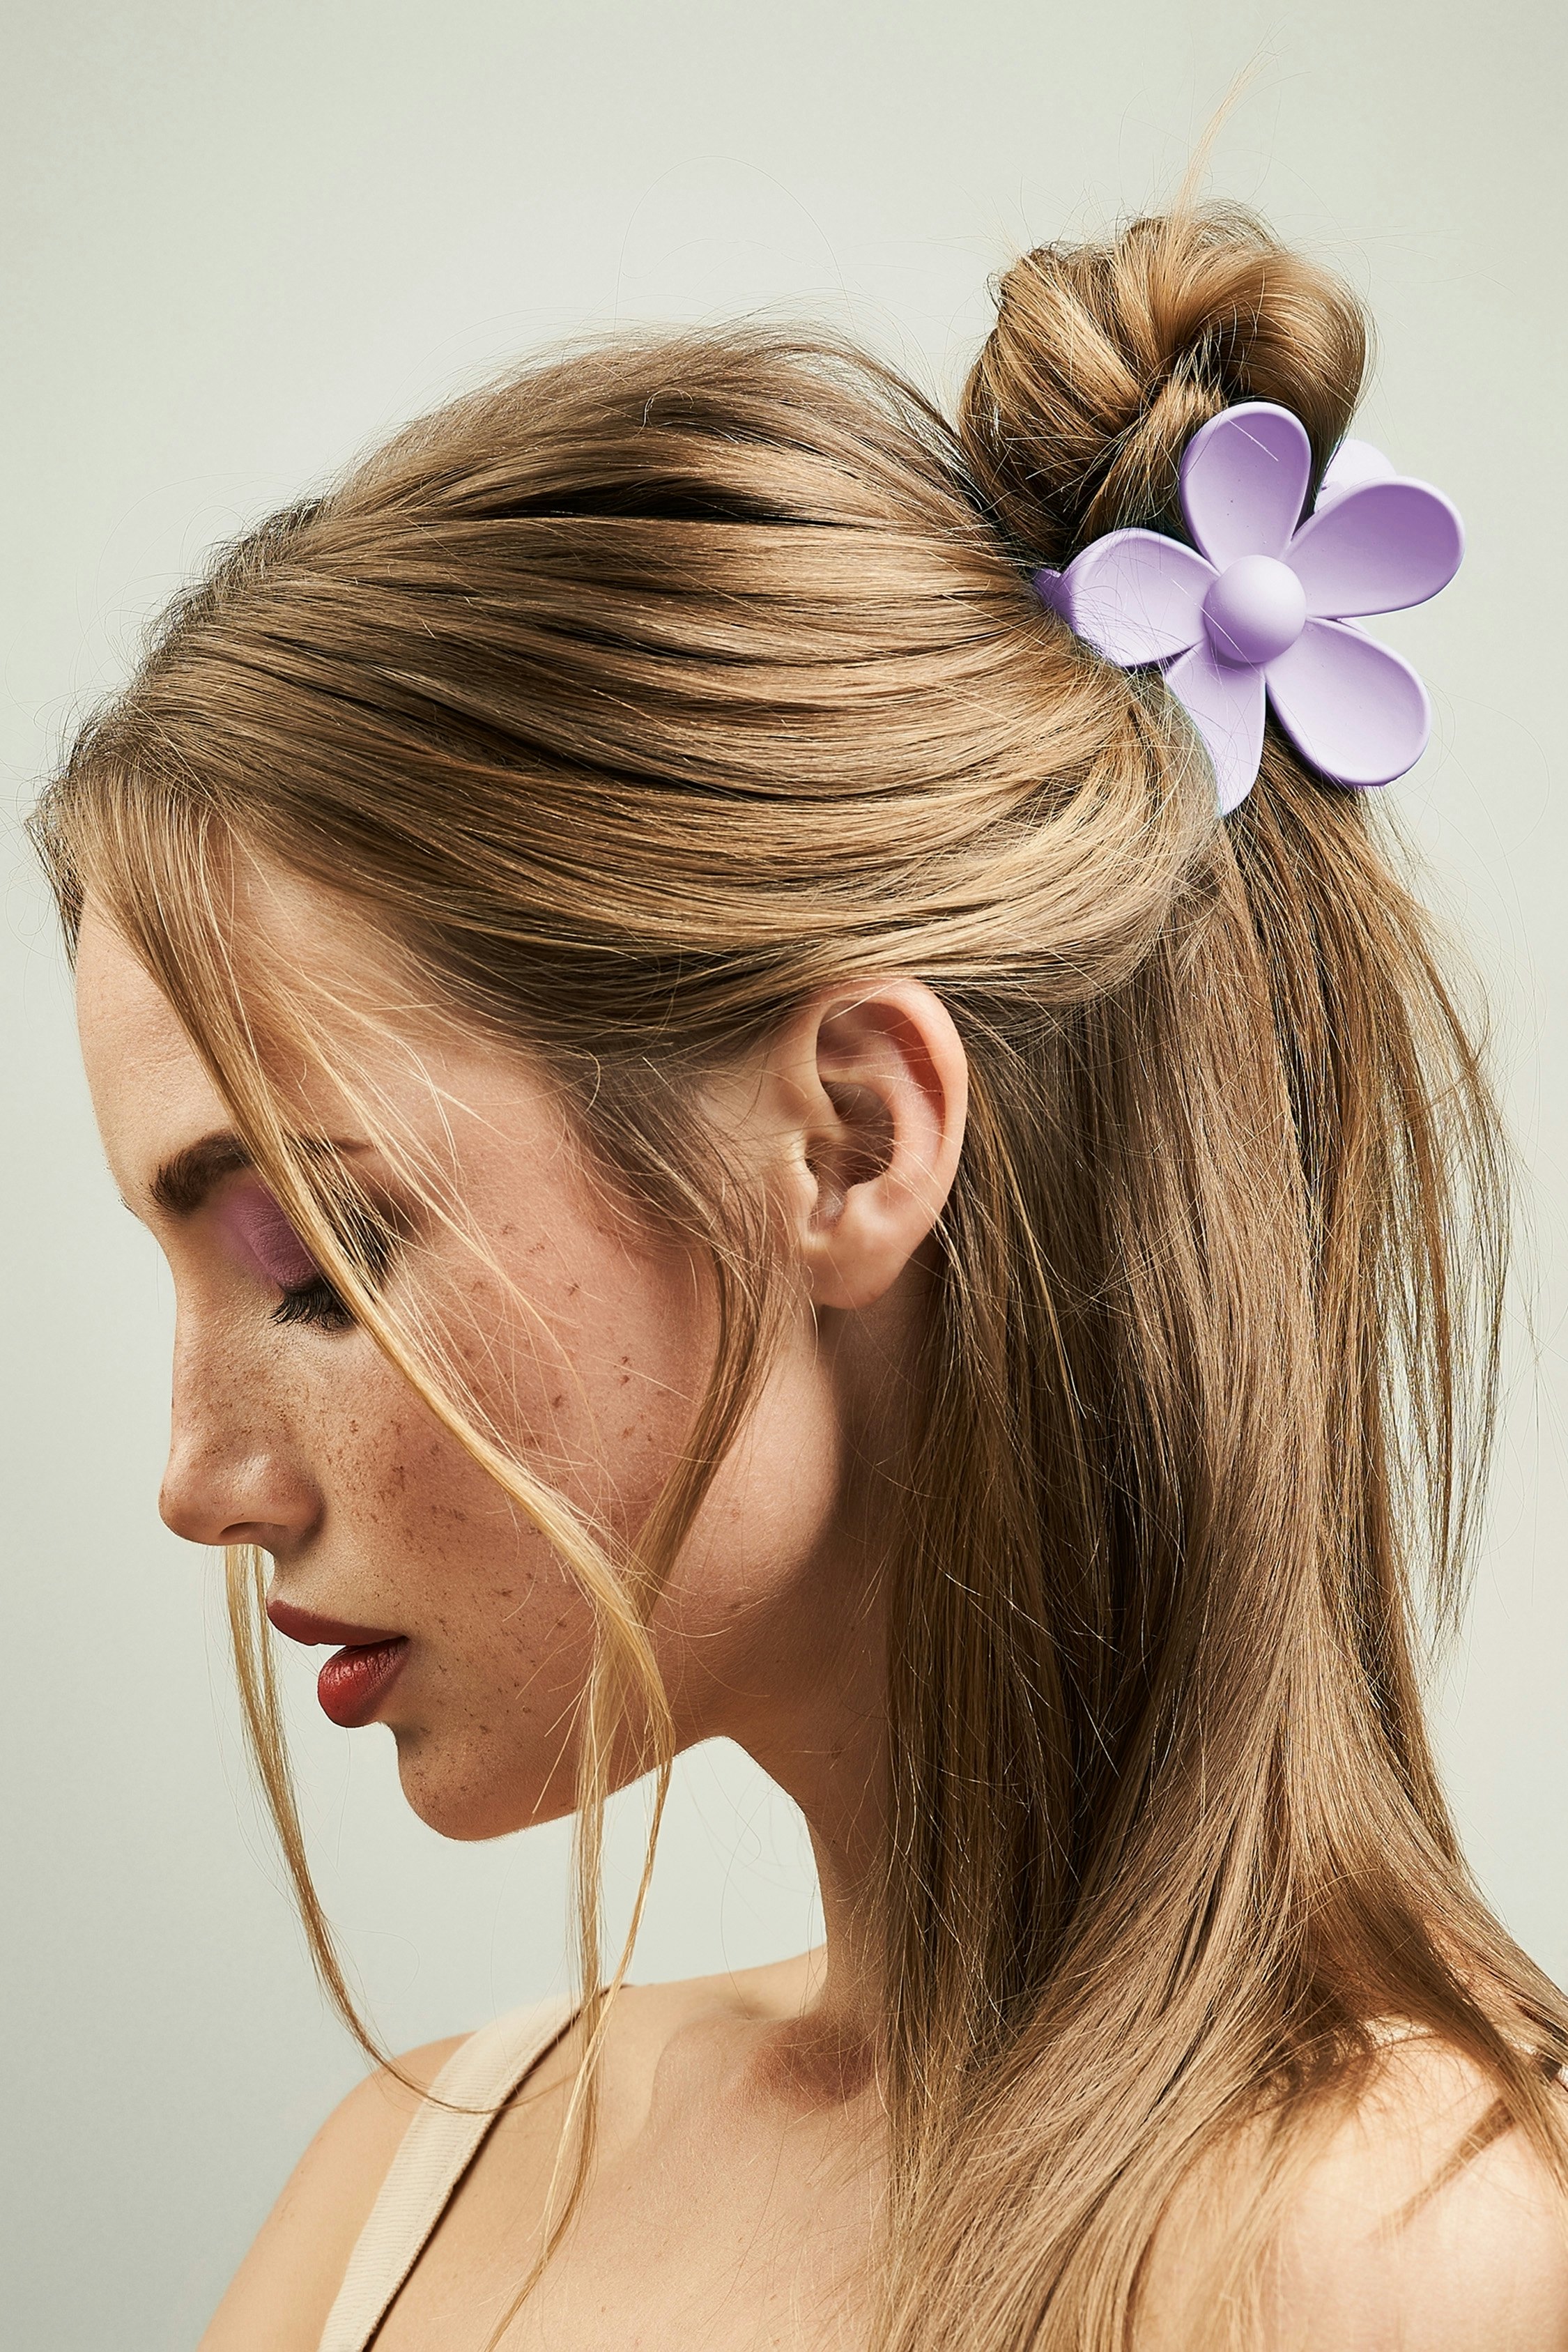 SPRING HAIRSTYLES  ACCESSORIES TO TRY